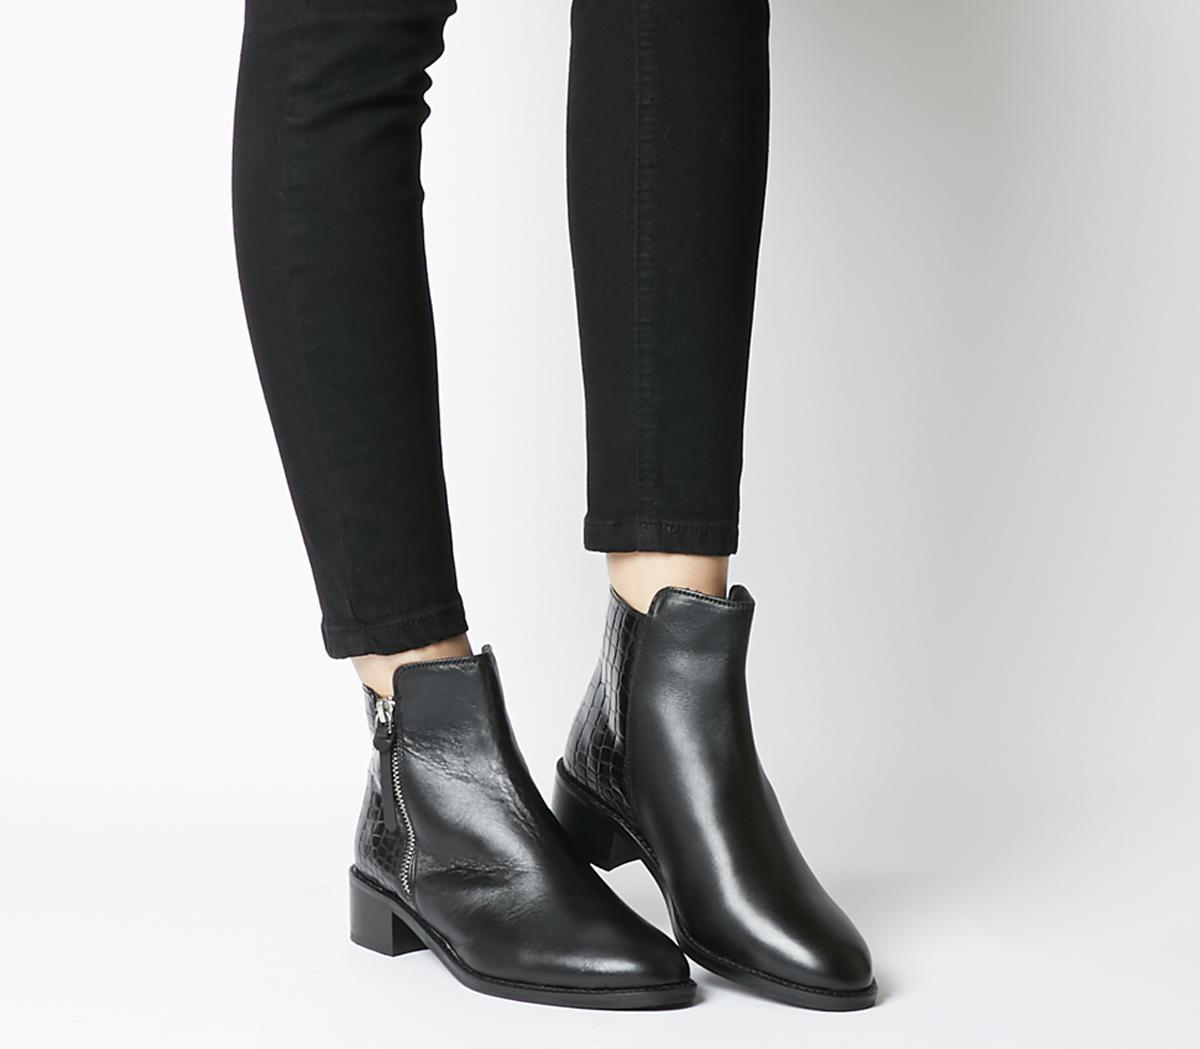 OFFICEAspen Side Zip Stepped Ankle BootsBlack Leather Mix